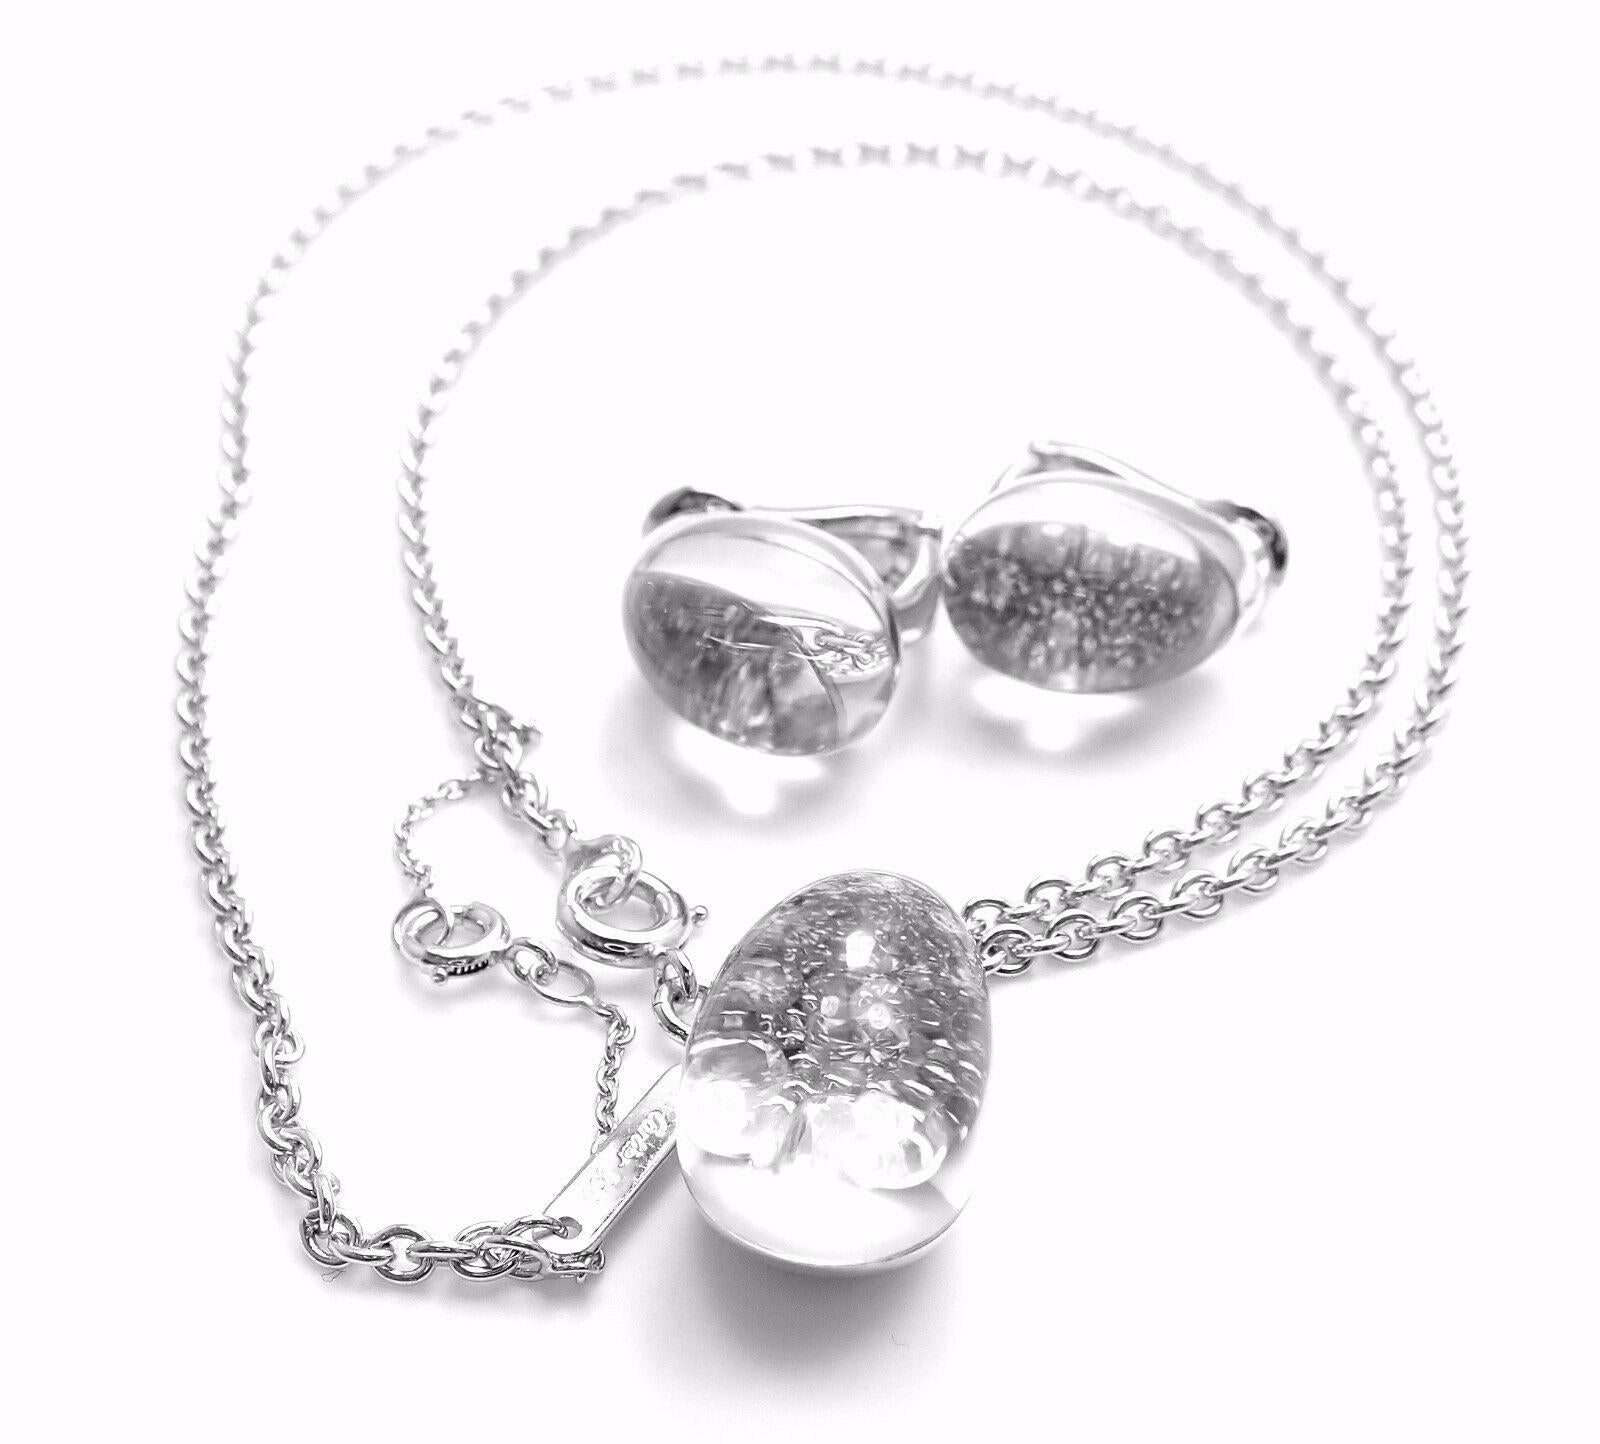 18k White Gold Diamond Rock Crystal Set Of Necklace & Earrings by Cartier From 
Myst de Cartier Collection. 
With Round brilliant cut diamonds VVS1 clarity, E color. 
These items come with Cartier boxes.
Measurements:
Pendant: 18mm x 11mm
Earrings: